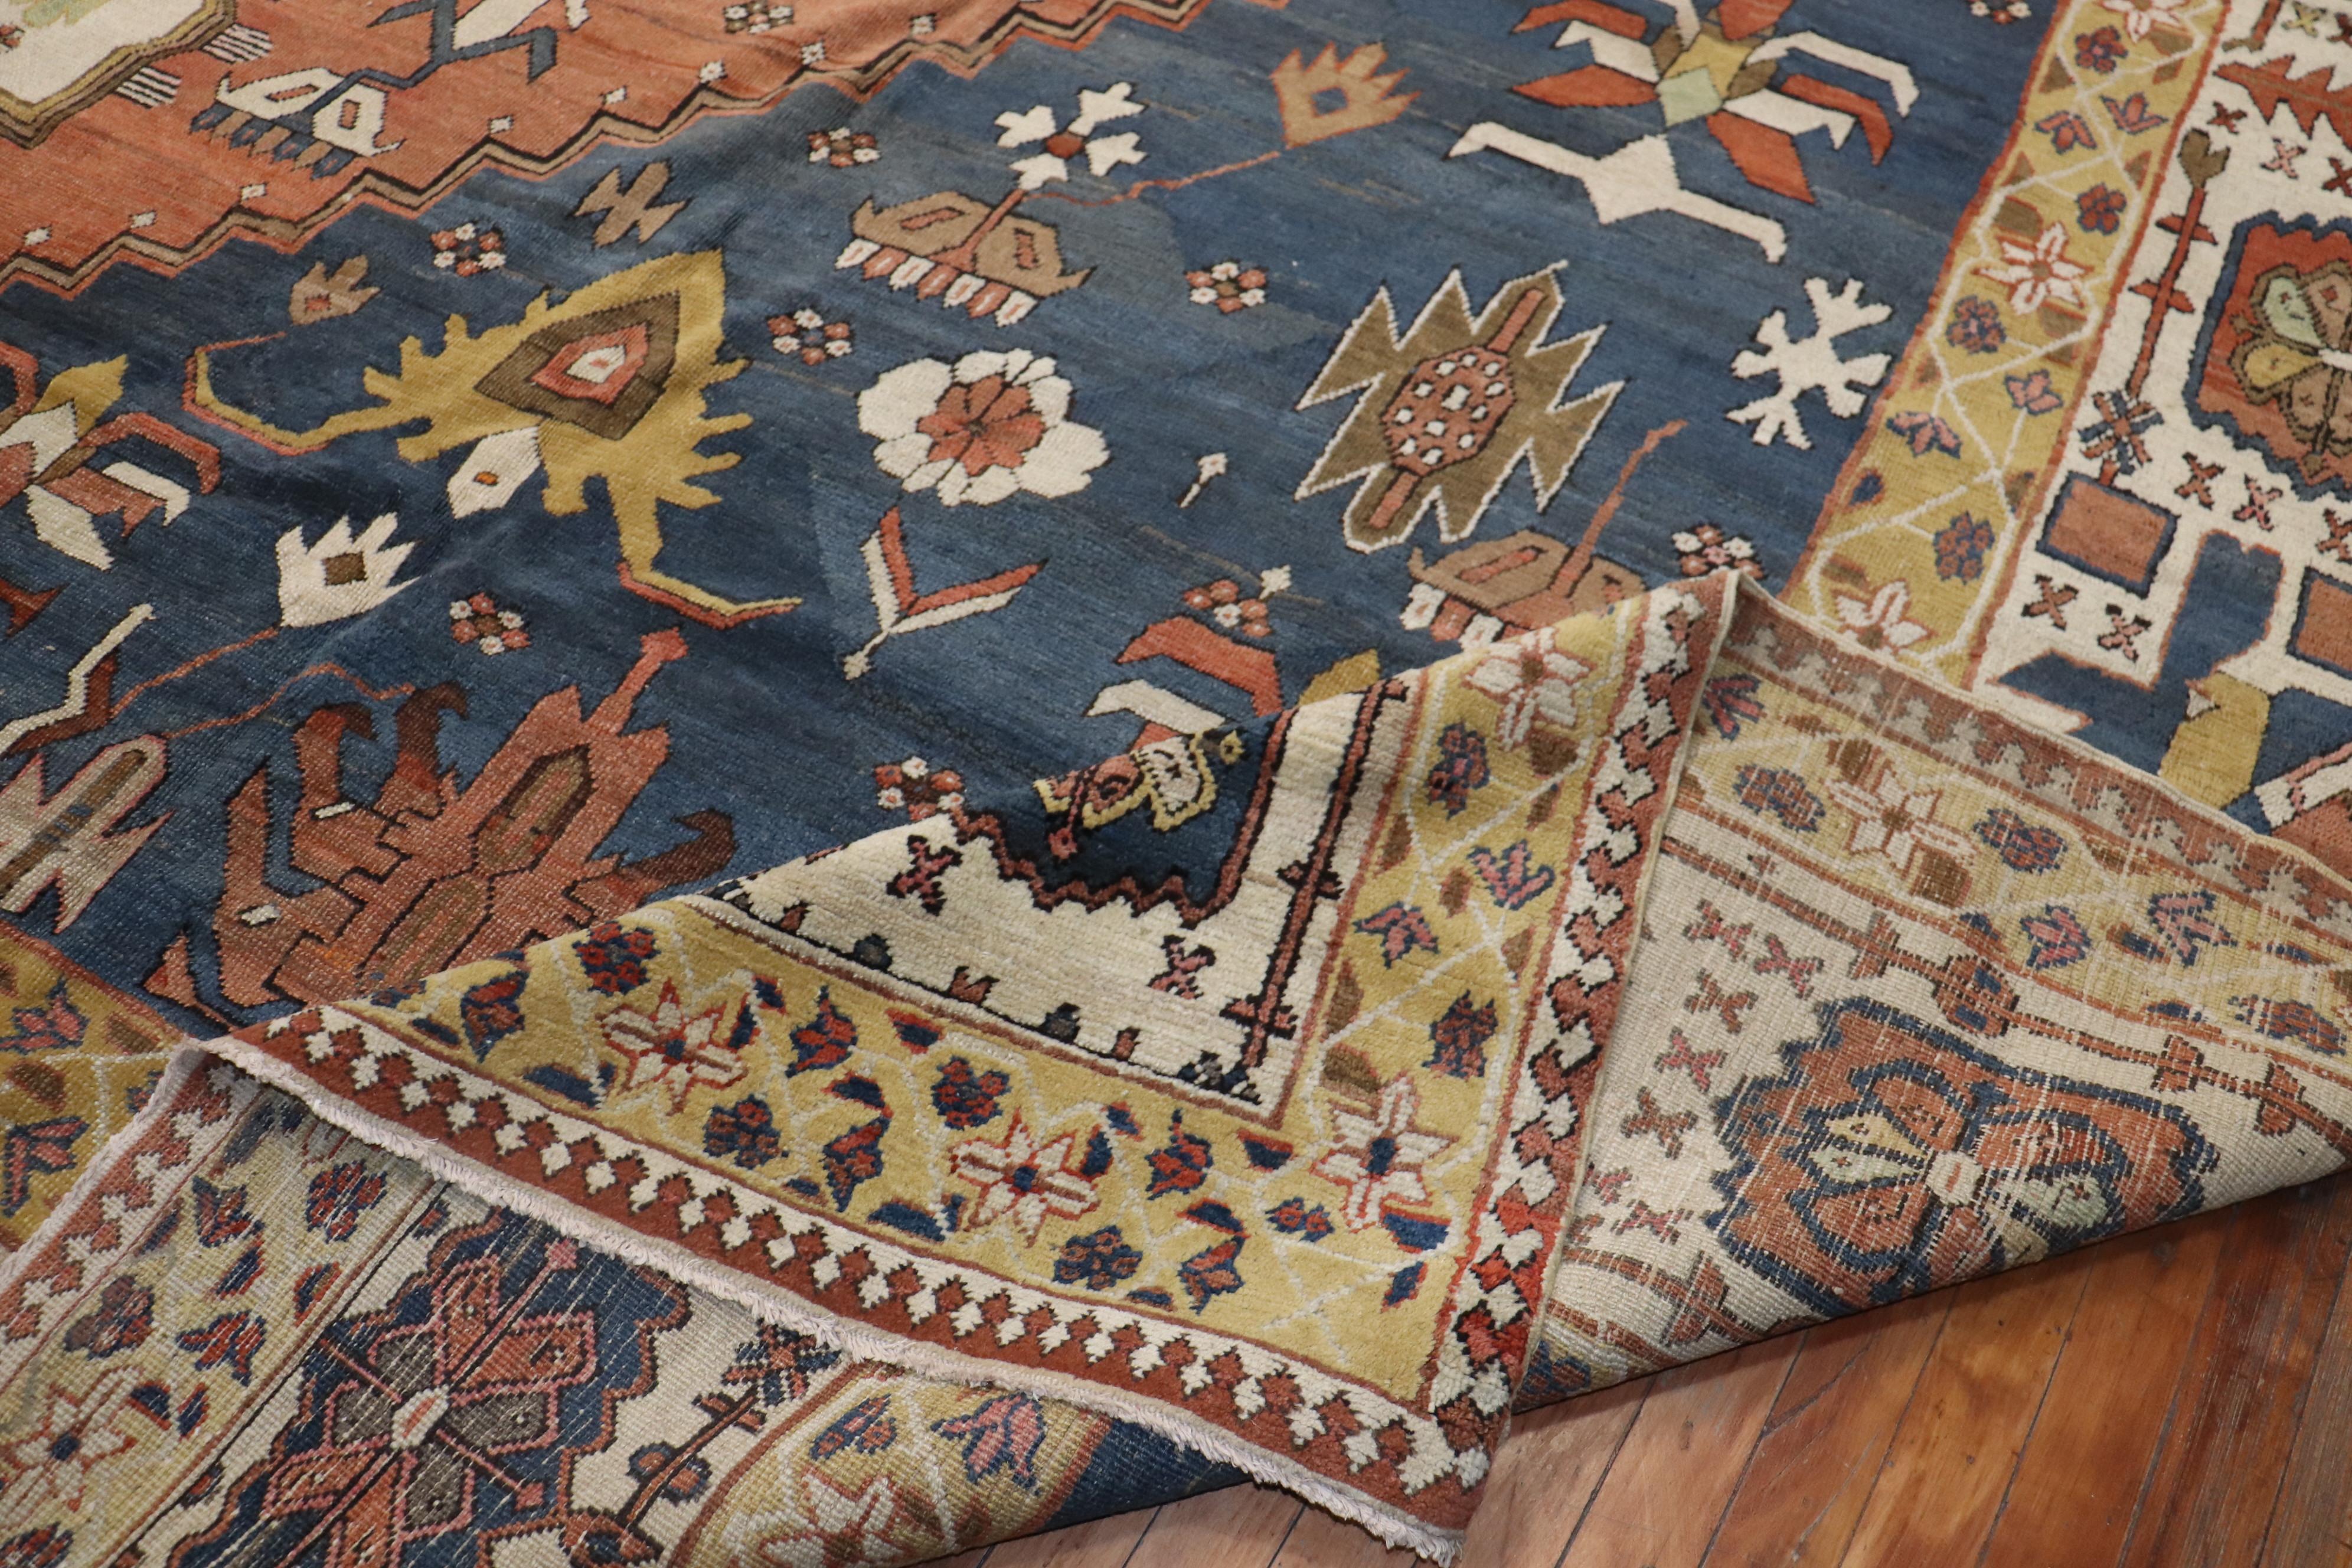 An amazing oversize late 19th century Tribal Persian Bakshaish rug. Bakshaish rugs are very rare to find in this size and exceptional condition. The geometric design is very common for rugs of this type. Background color is a soft denim blue, ivory